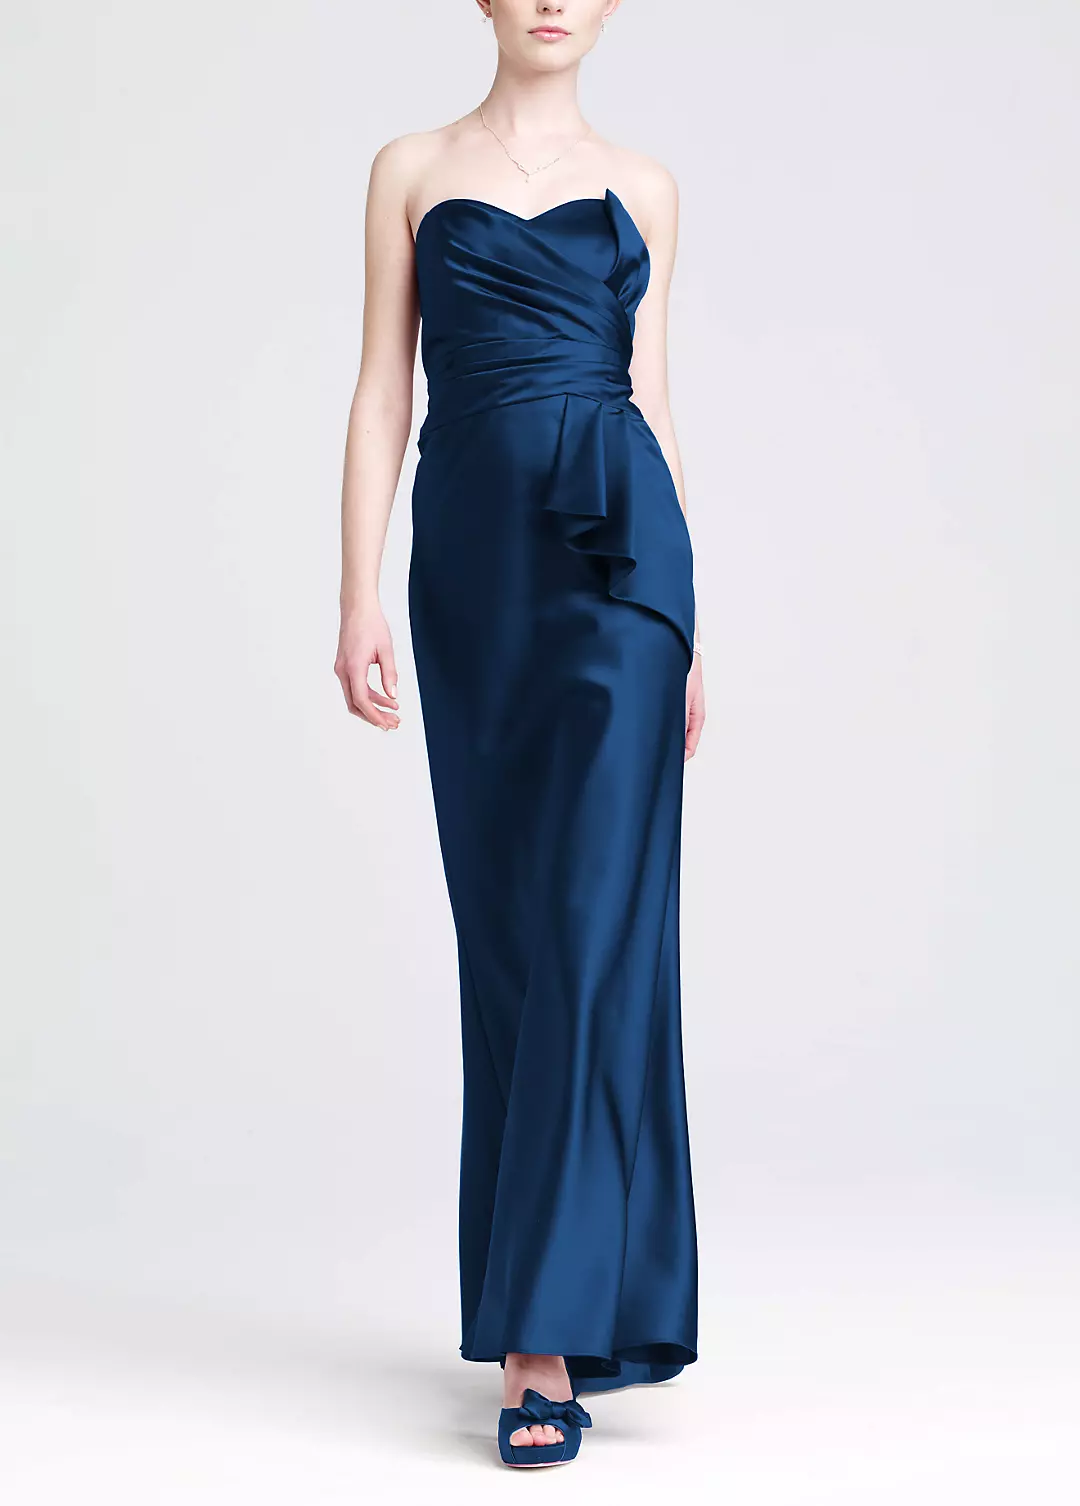 Long Strapless Dress with Side Peplum Image